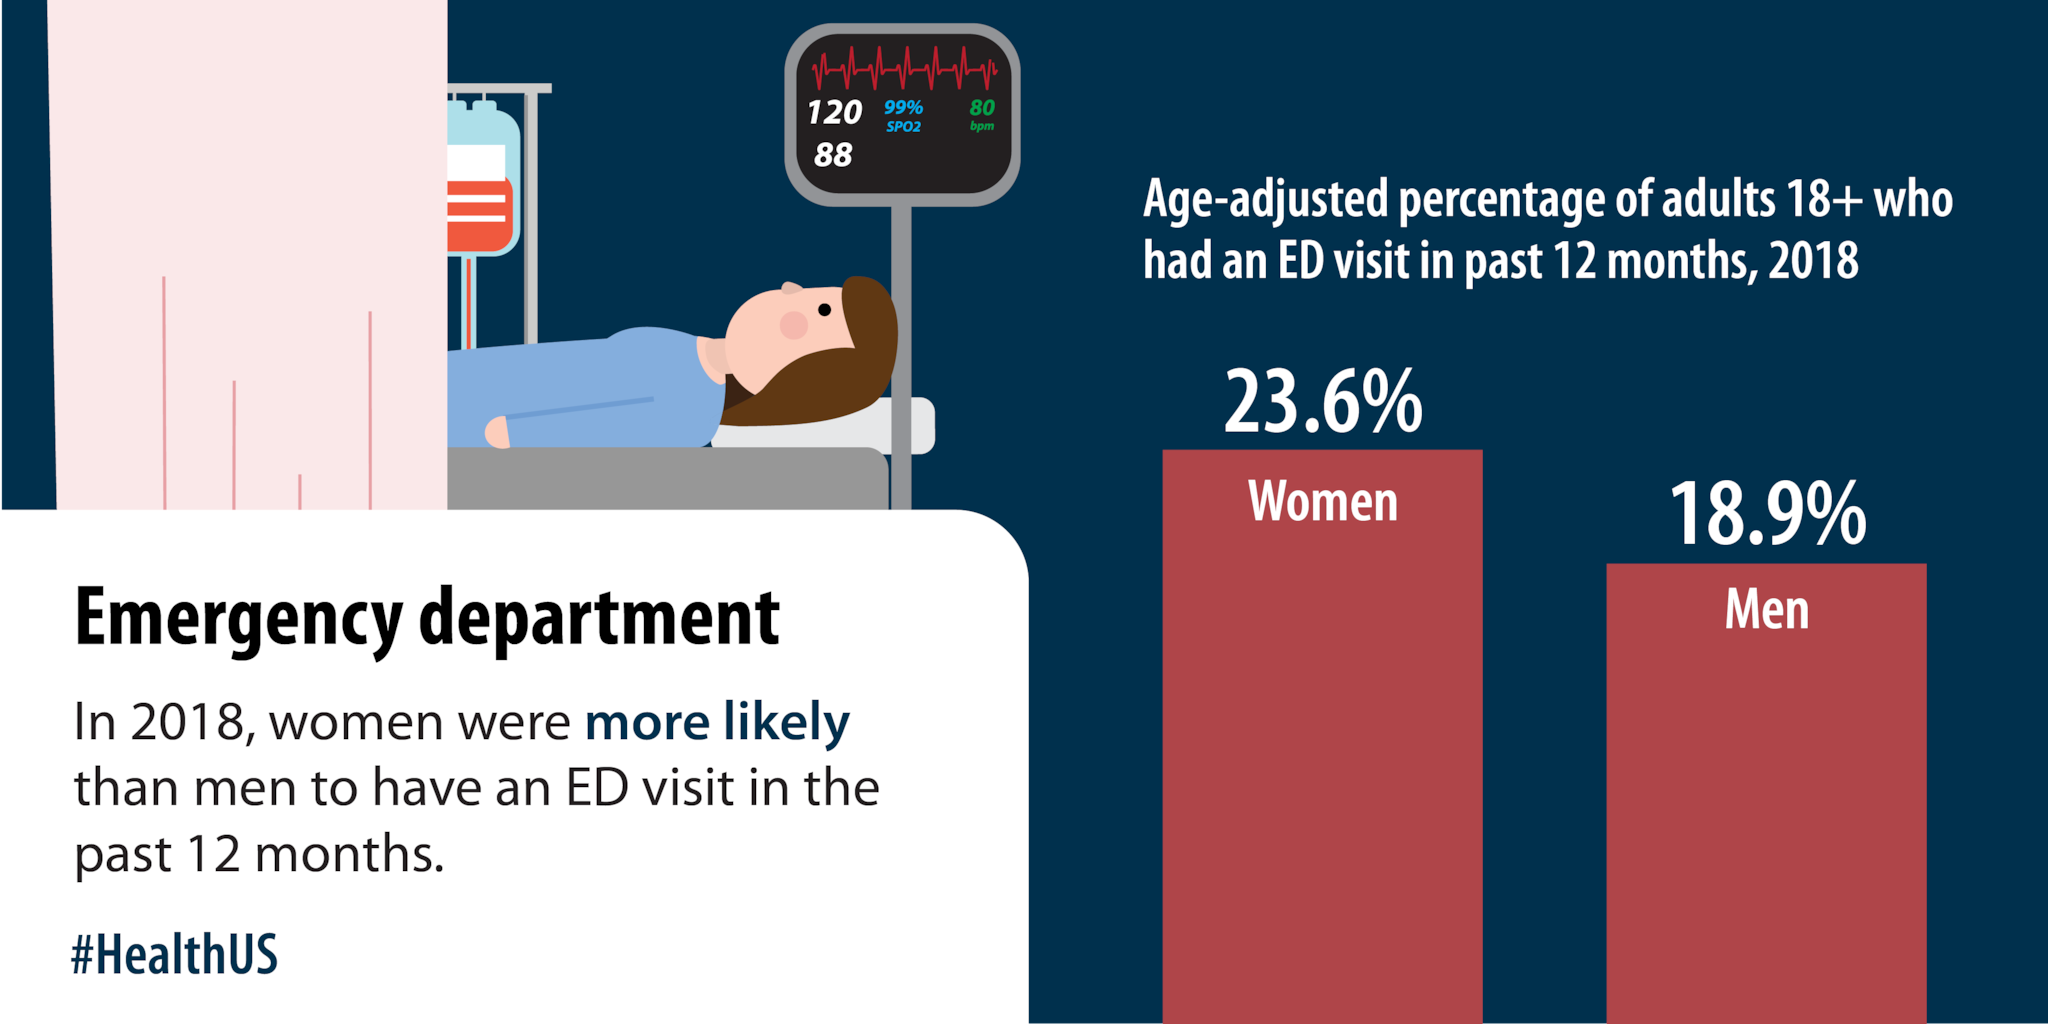 In 2018, women were more likely than men to have an ED visit in the past 12 months.